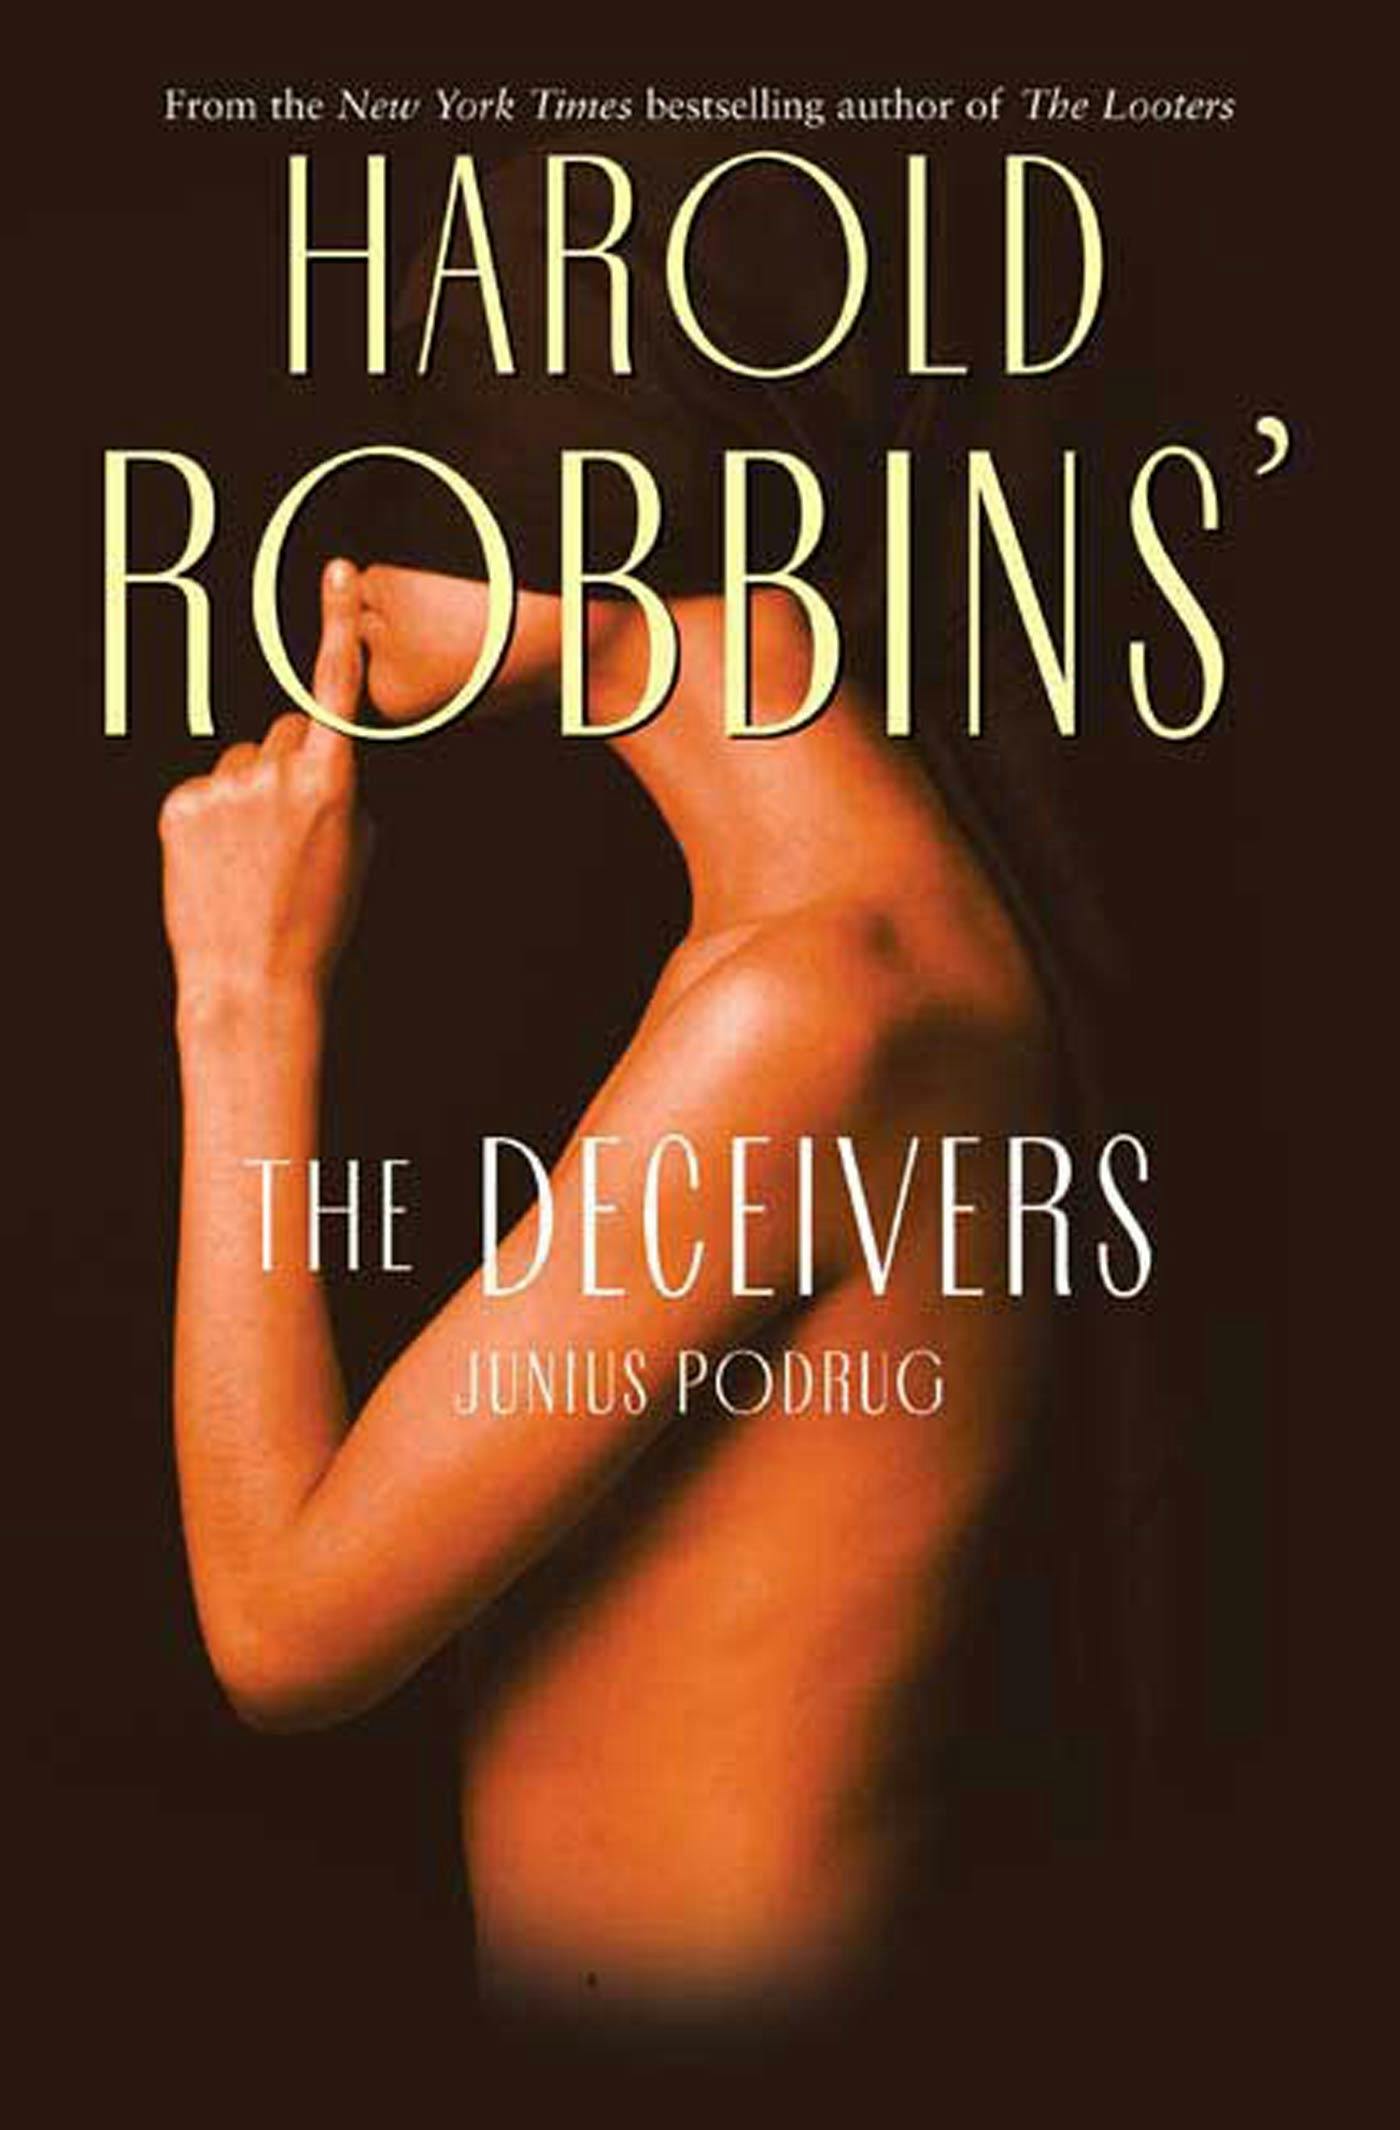 Cover for the book titled as: The Deceivers